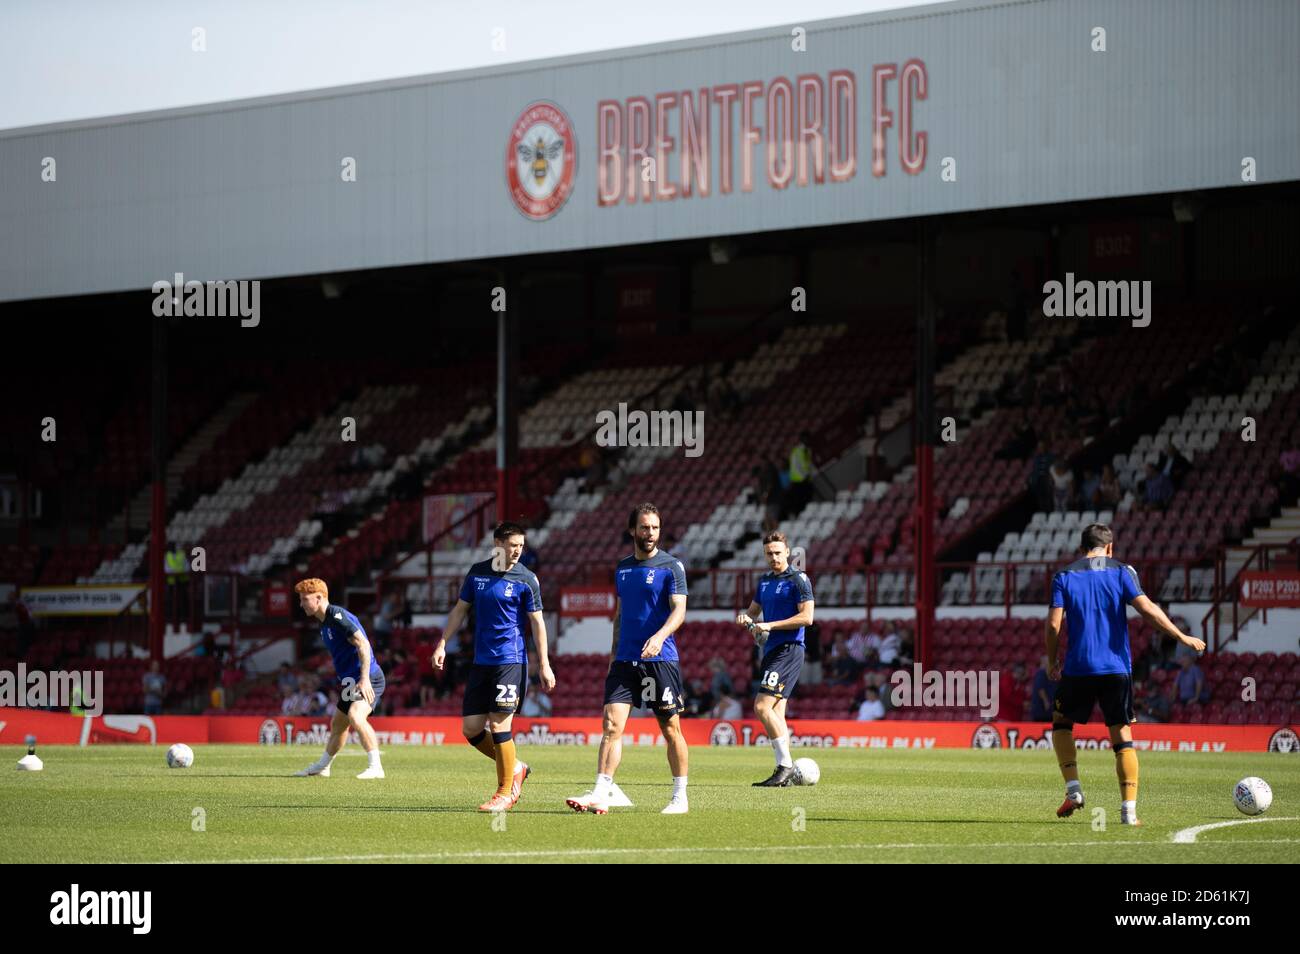 Nottingham Forest players warm up before the Brentford's and Nottingham Forest's Stock Photo